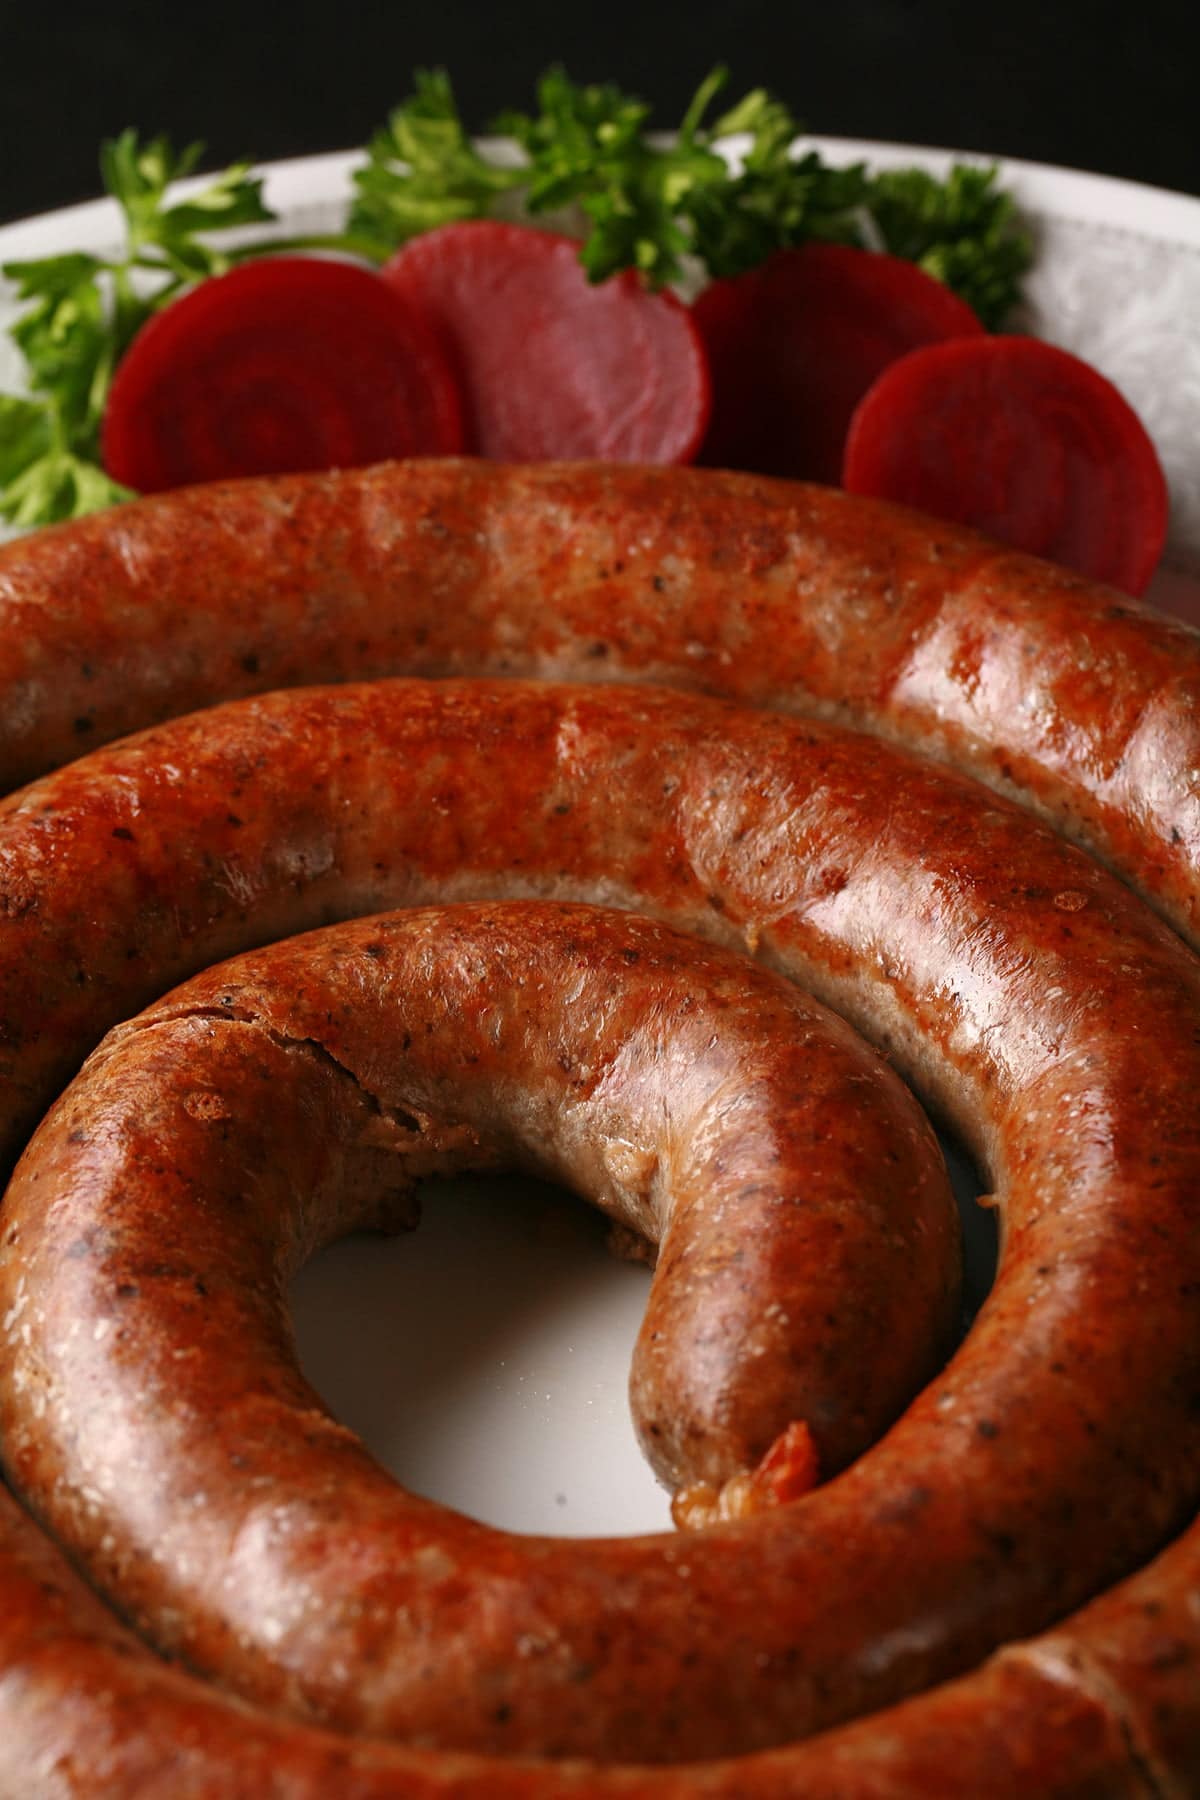 A large coil of potato sausage on a white plate. It's garnished with slices of beet pickles and some parsley.